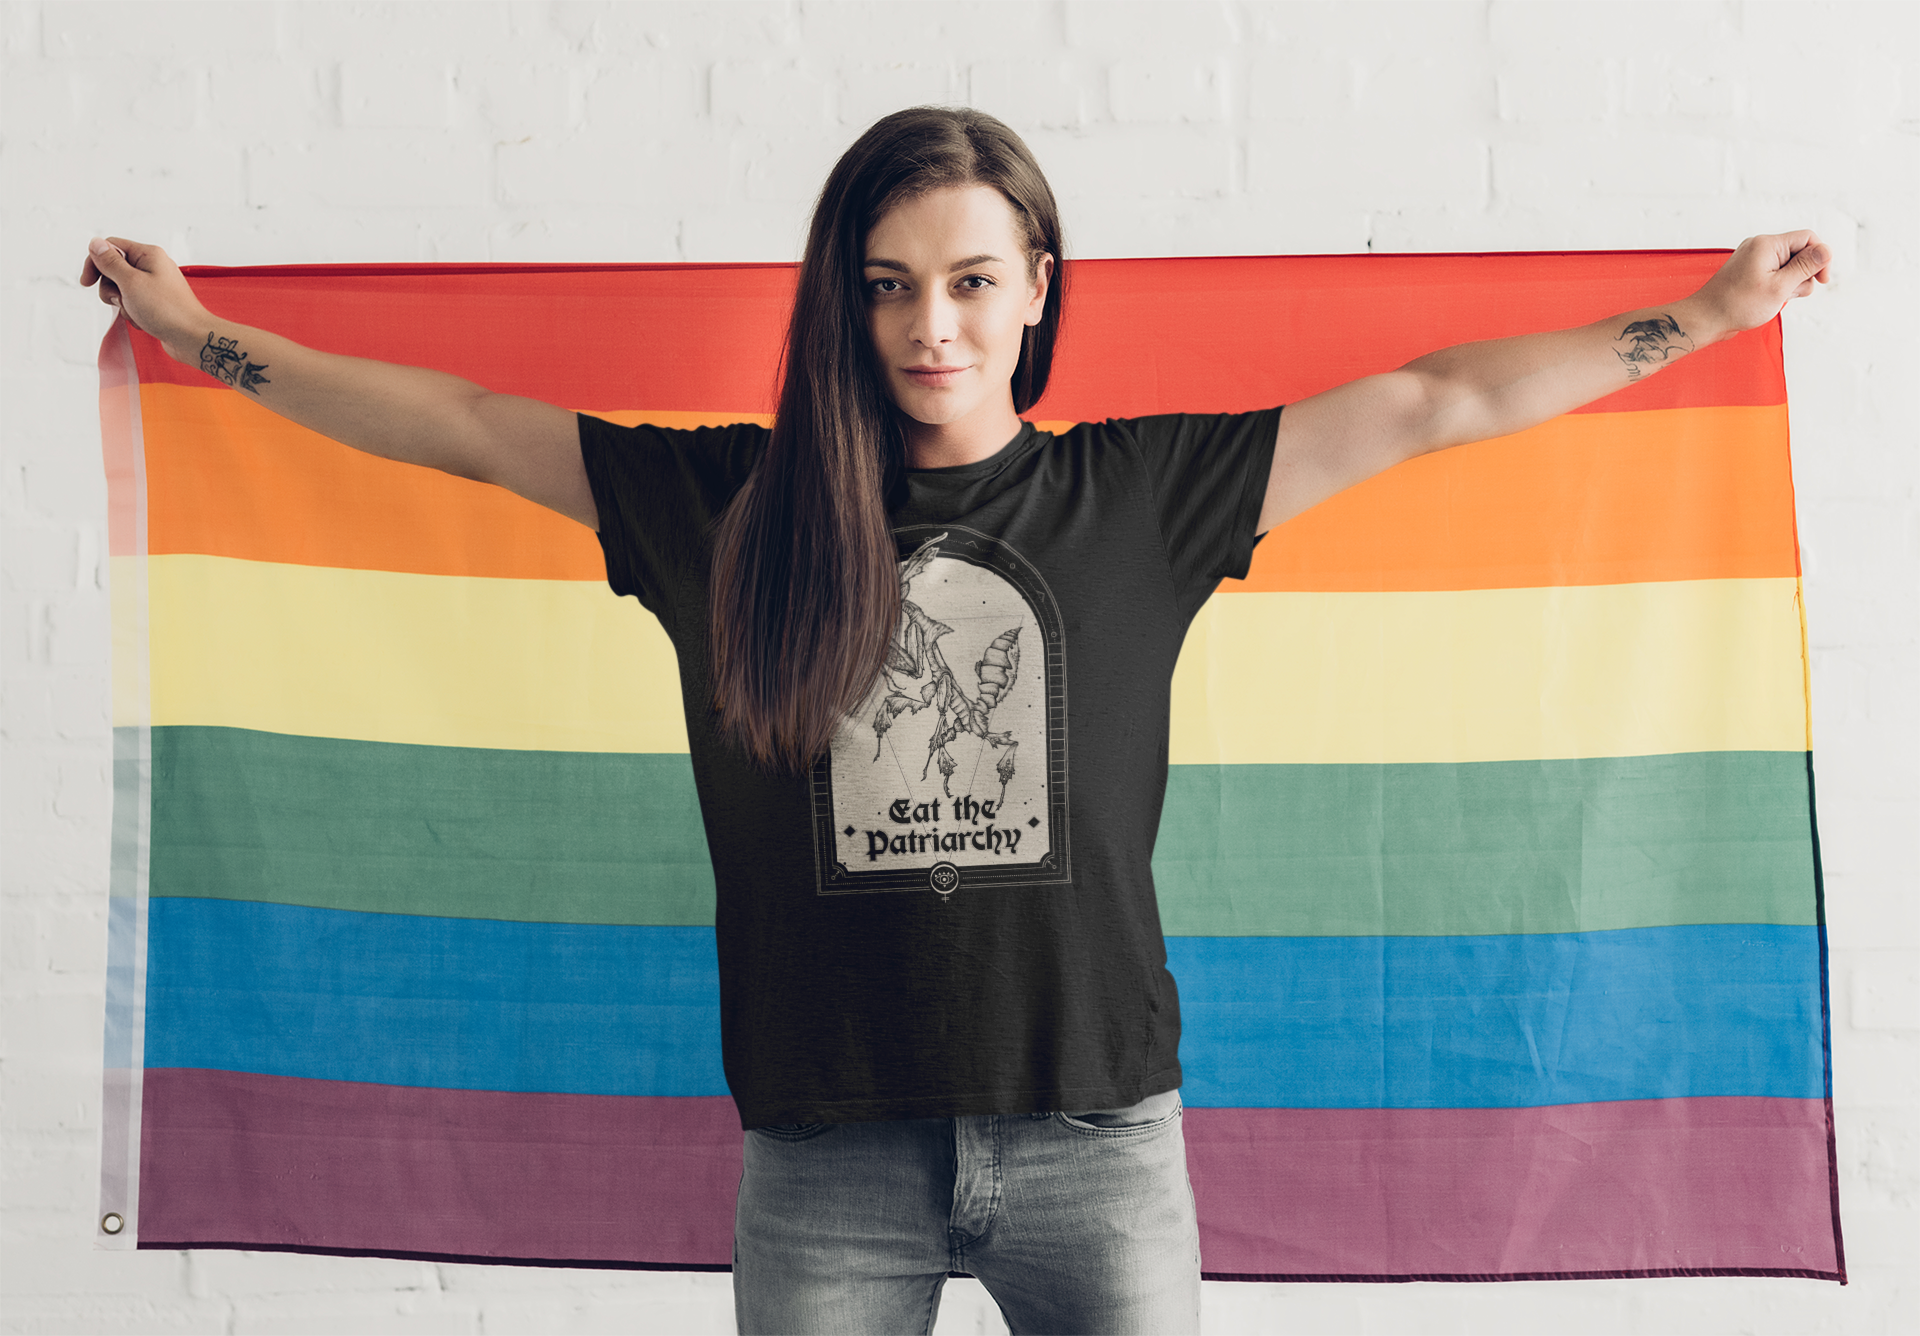 an inclusive activist adult woman with tattoos and brown hair wearing a gothic black top with a witchy feminist praying mantis illustration that says "eat the patriarchy" while holding a rainbow gay pride flag